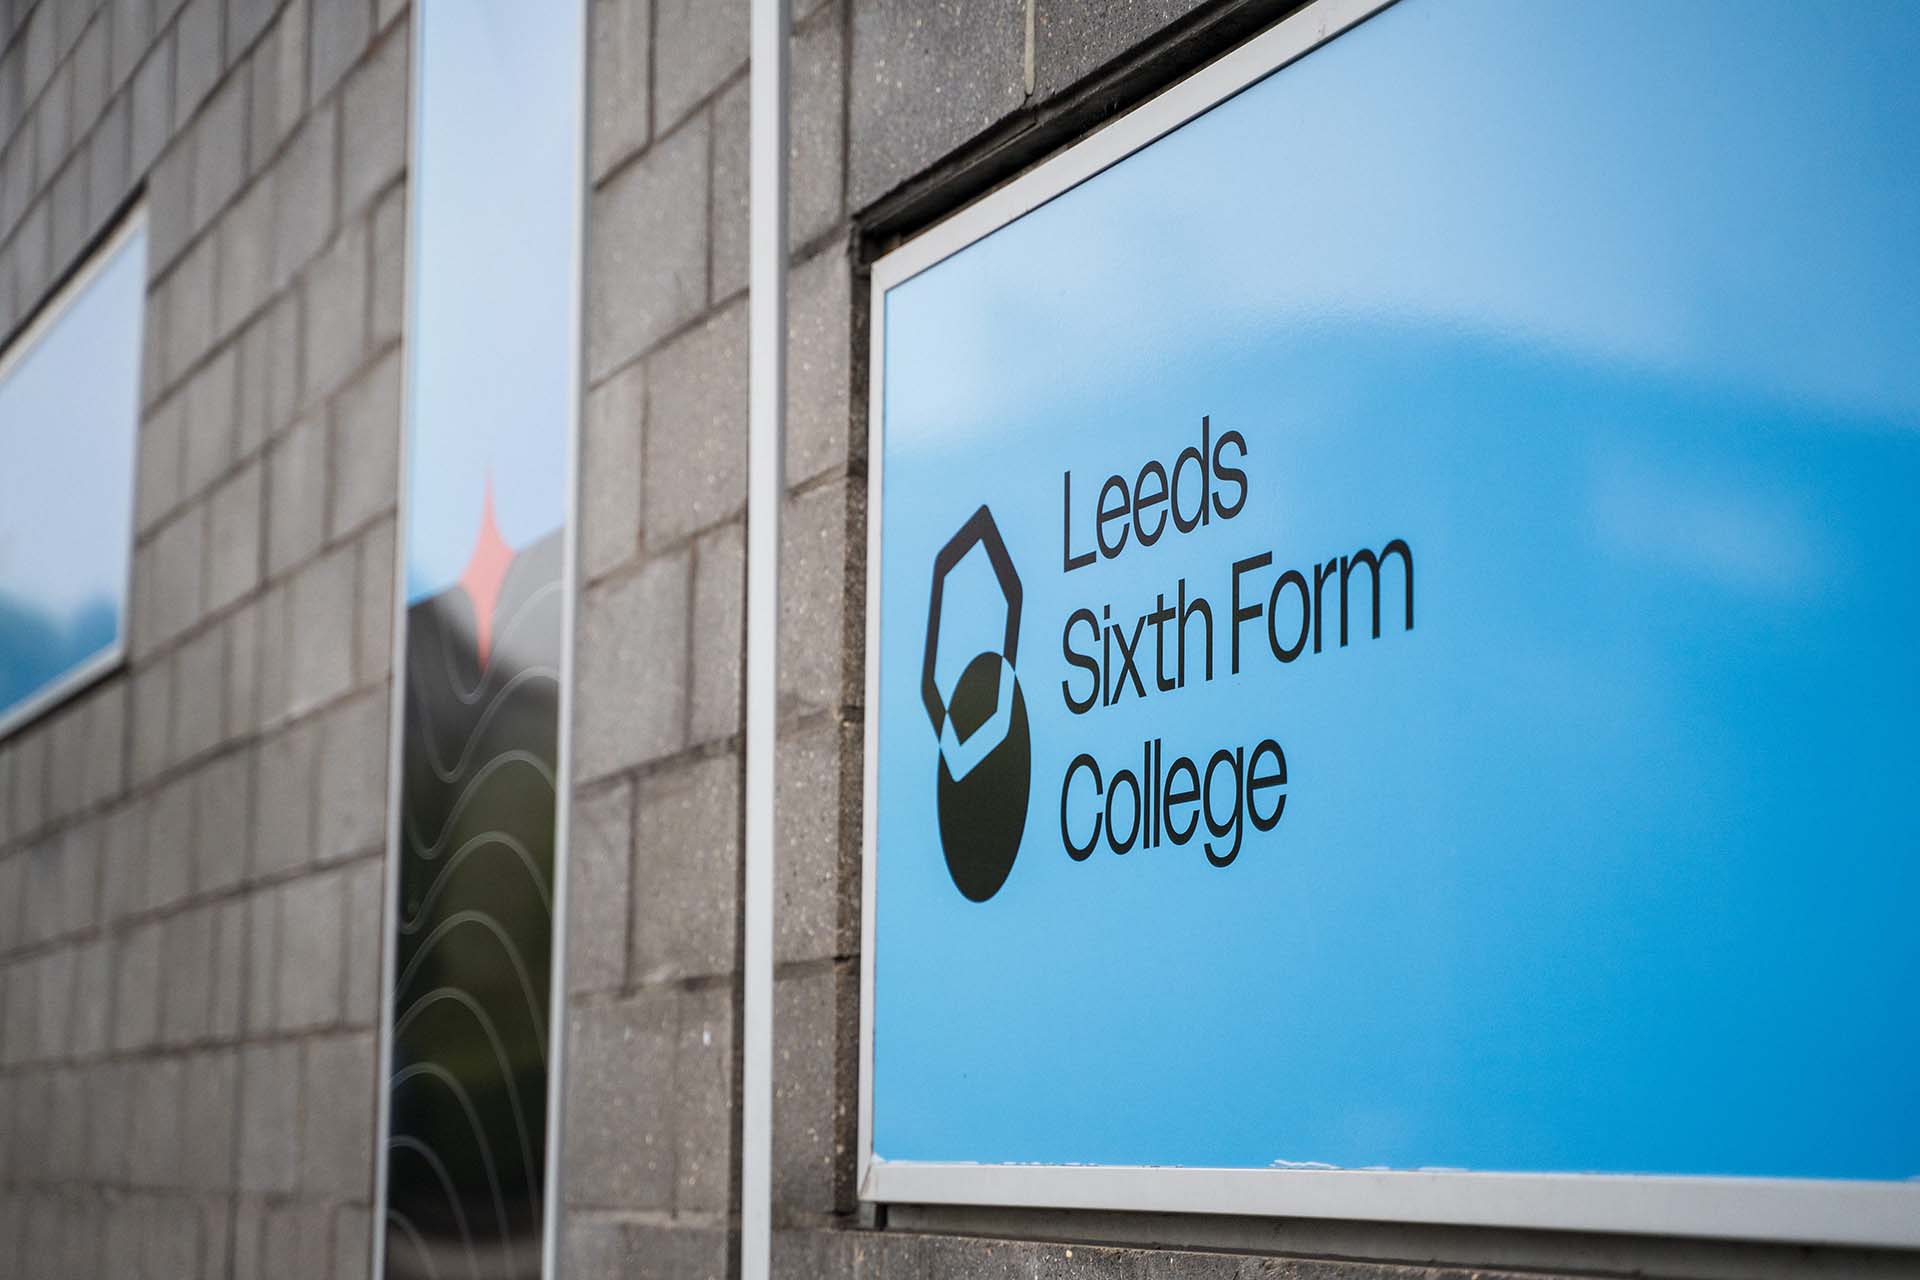 Poster on the outside of the Sixth Form College building with the Leeds Sixth Form Logo